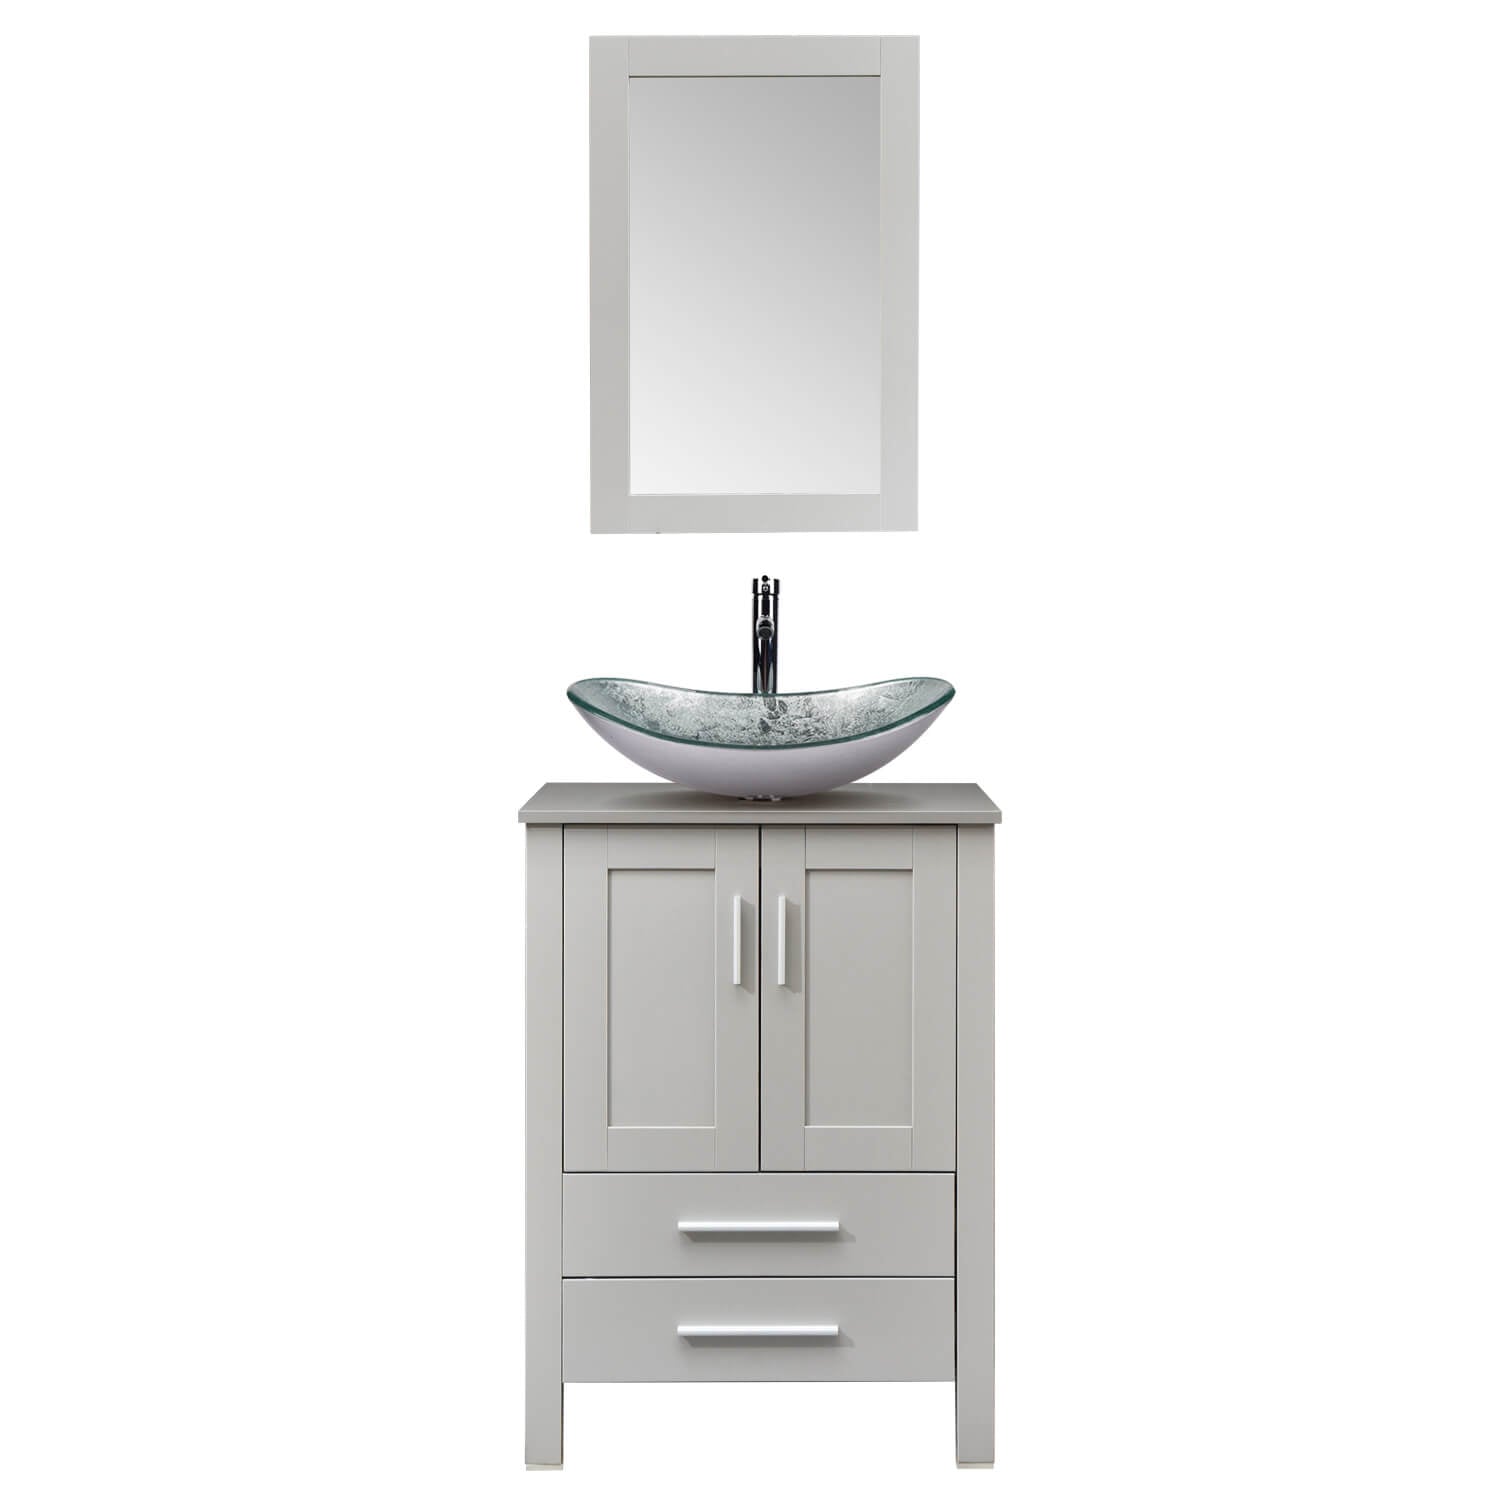 Elecwish gray wood bathroom vanity with silver boat glass sink BG005SI in white background